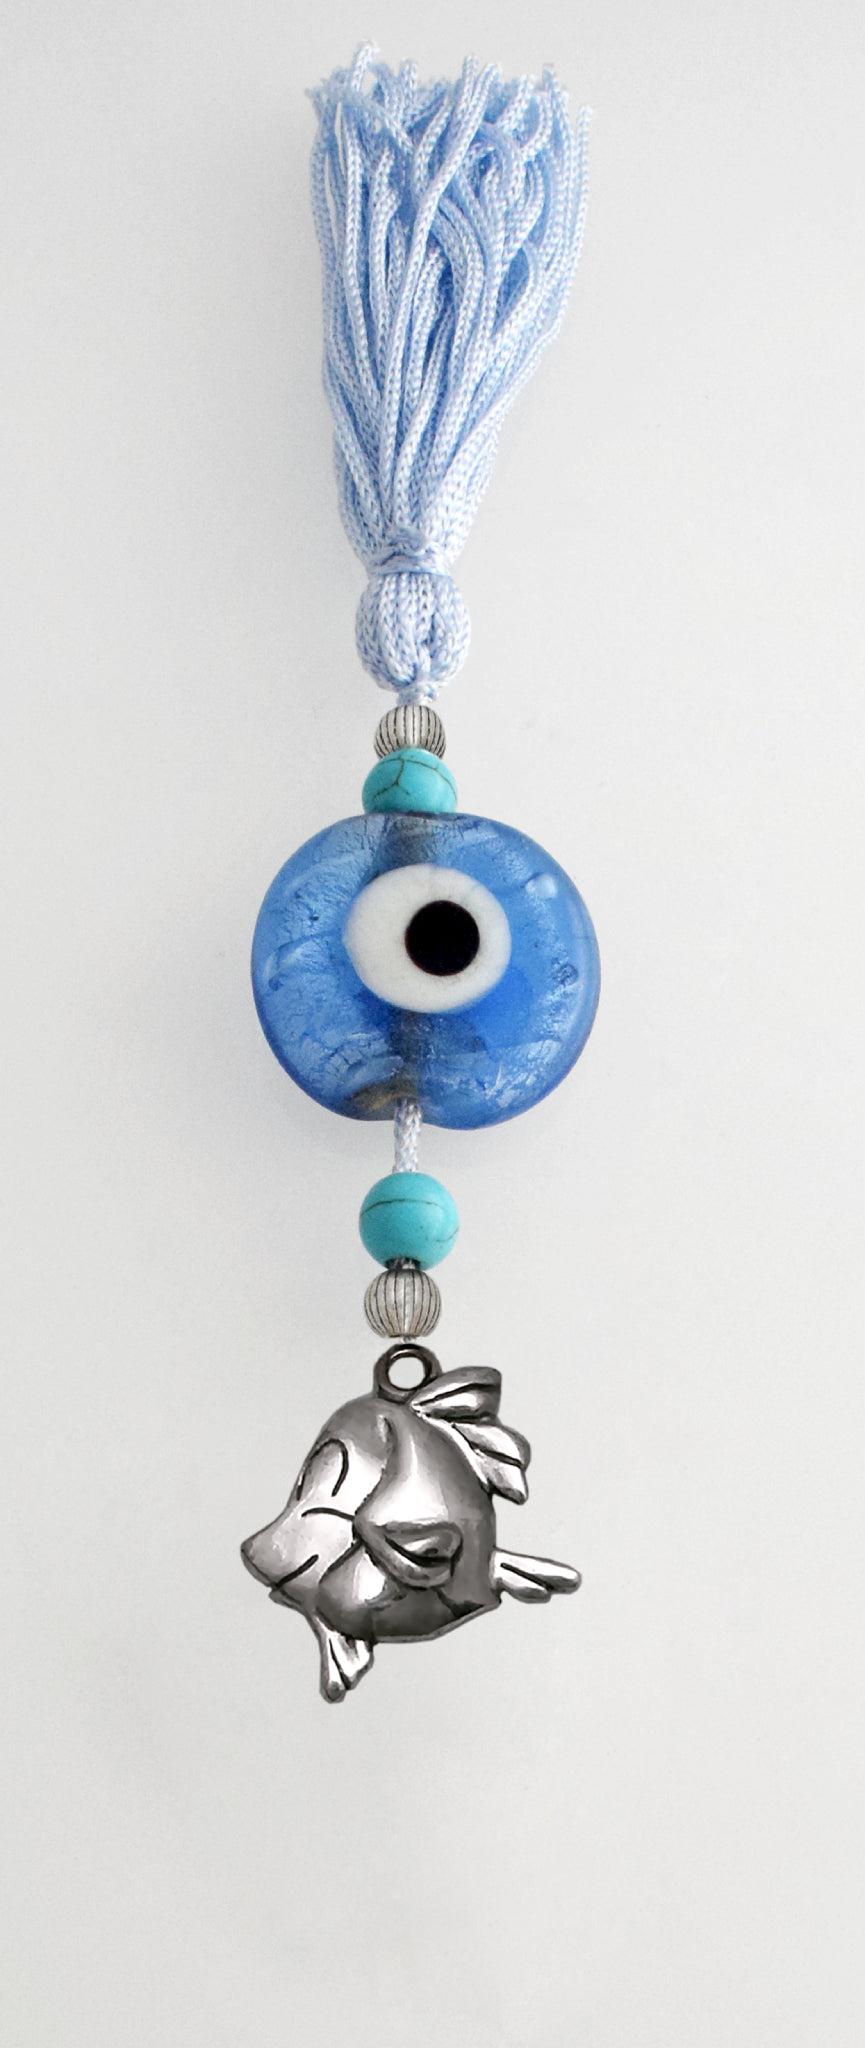 Evil Eye Charm on a tassel, House decoration, holiday decor, welcome gift, silver charm, Baby Fish Charm - ELEFTHERIOU EL